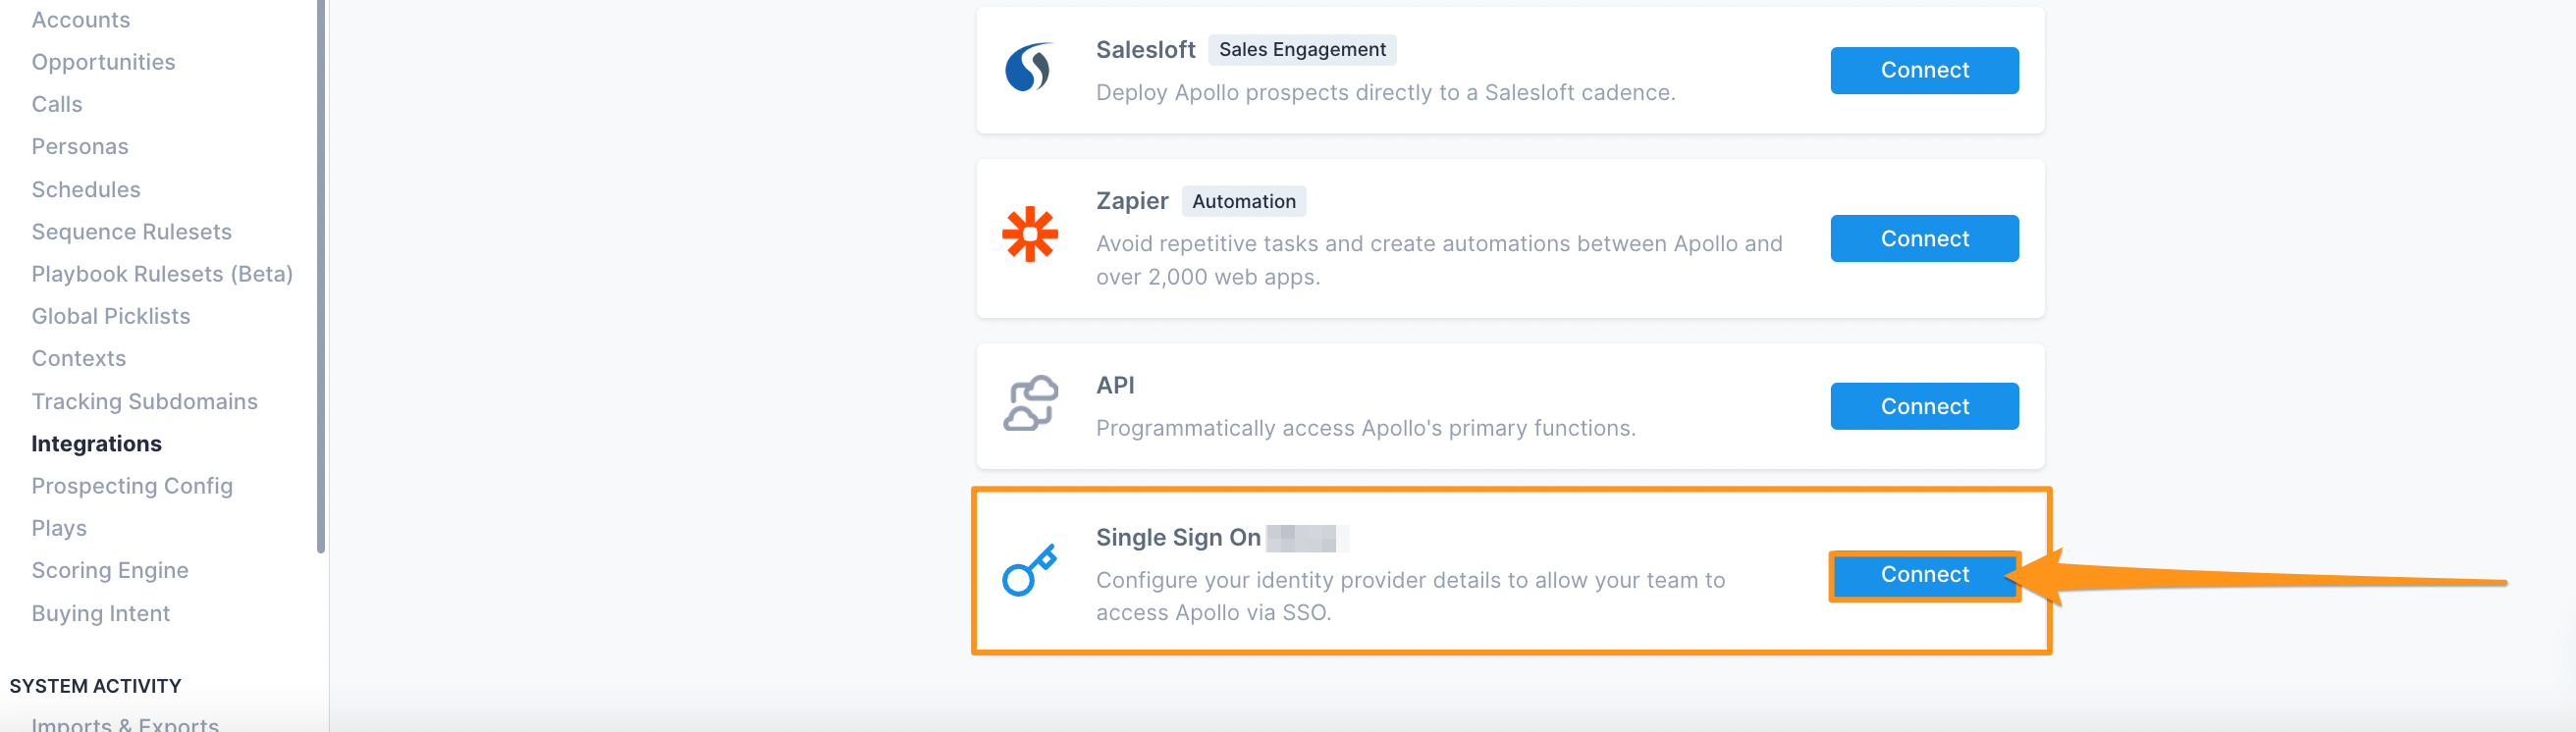 Connect SSO button on integrations page